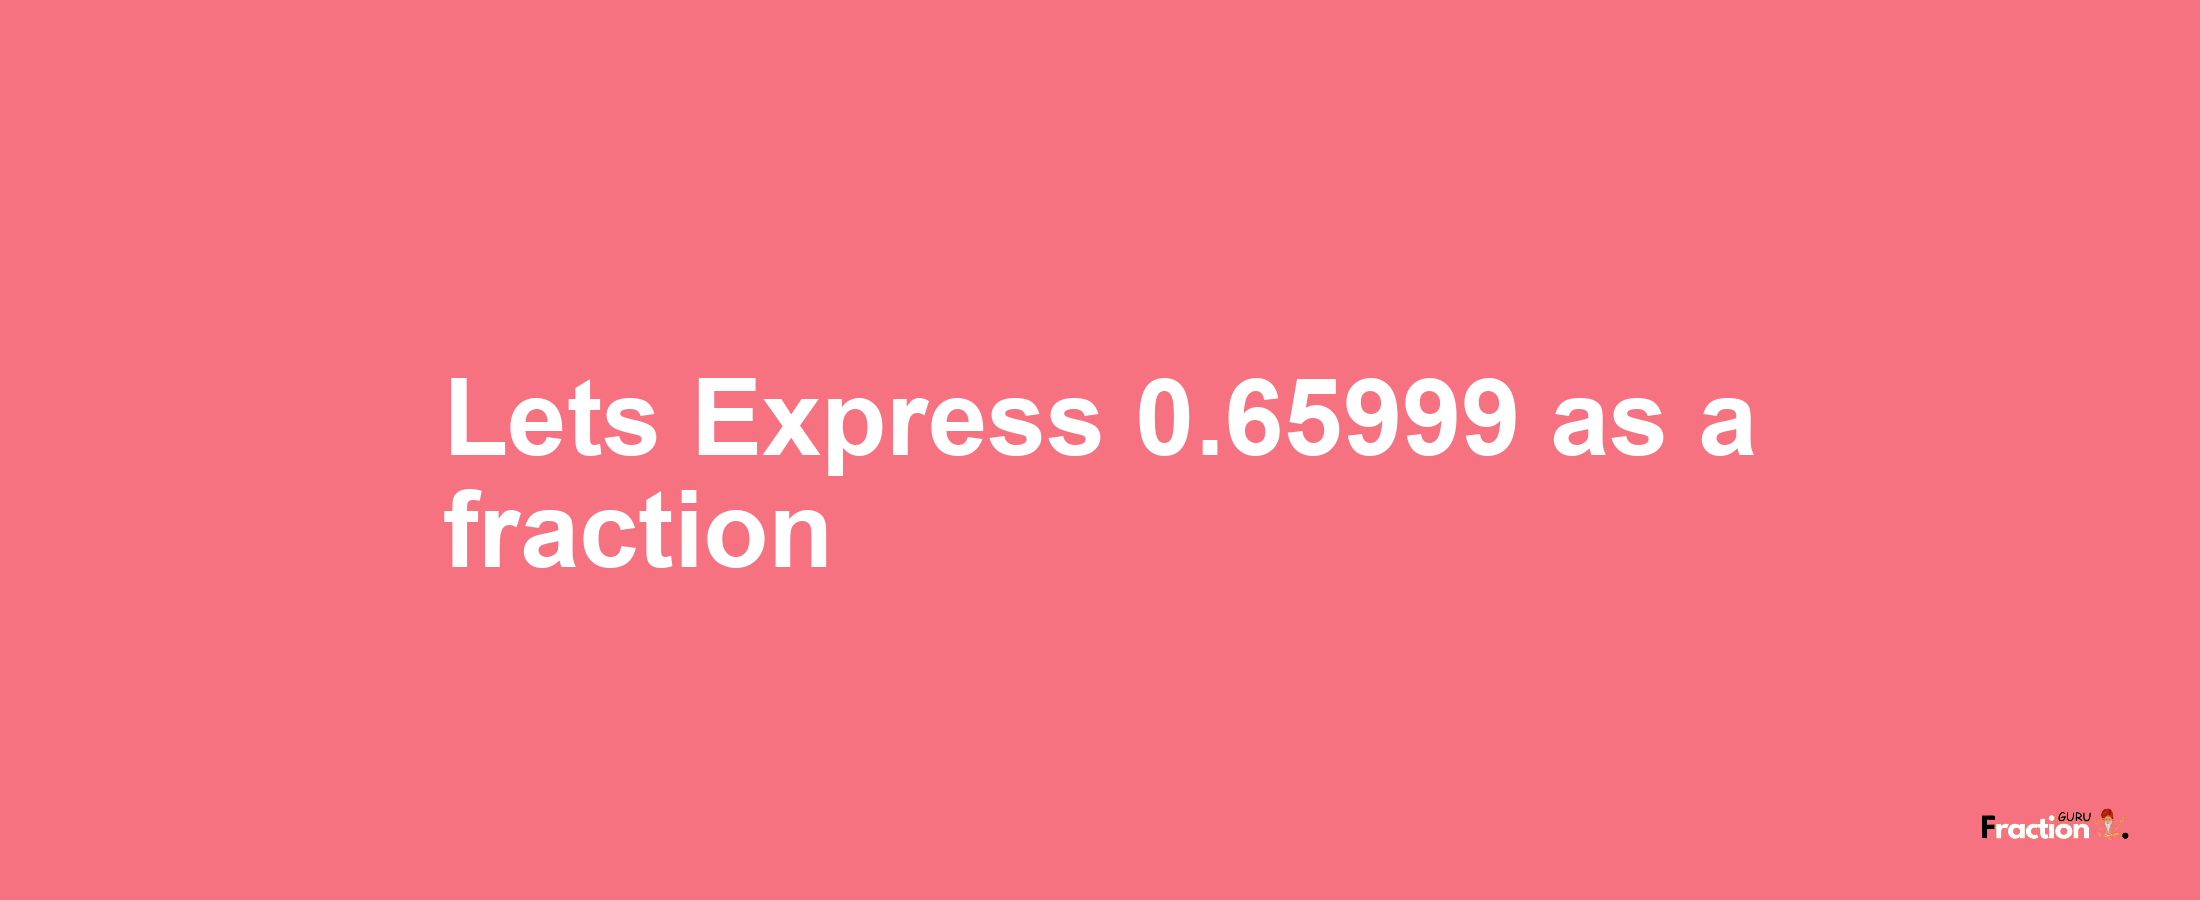 Lets Express 0.65999 as afraction